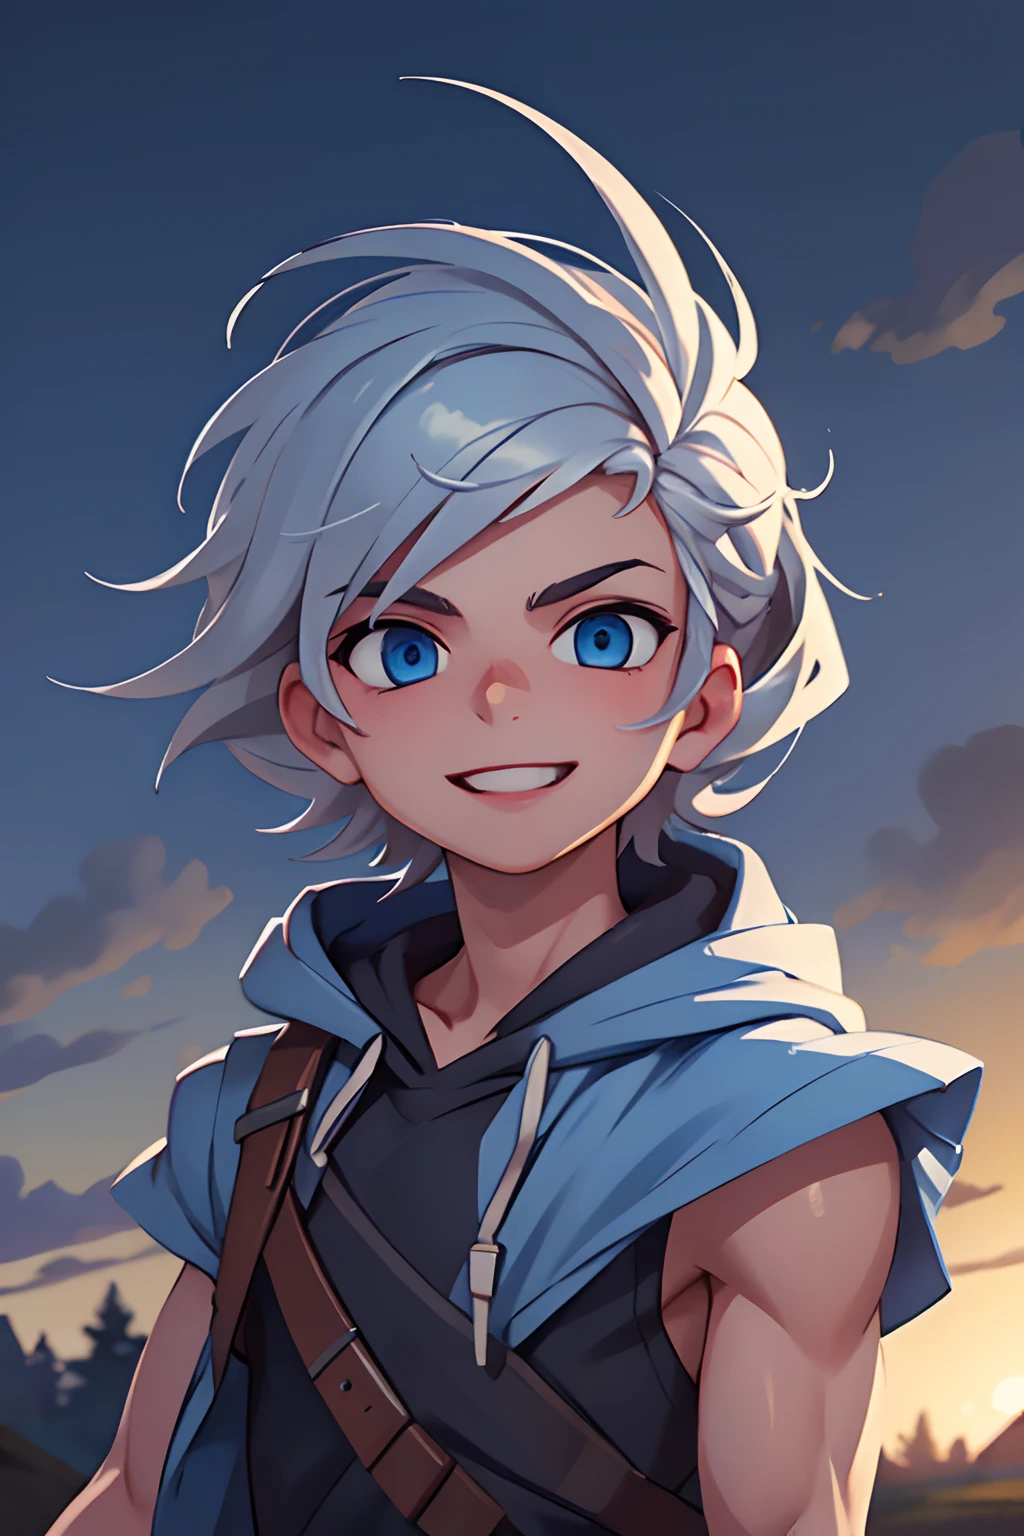 masterpiece,  1boy,  young,  handsome,  silver messy hair,  perfect face,  detailed eyes and face,  blue eyes, toothy smile,  sleeveless hood,  clean shaved,  capturing a rural atmosphere,  dynamic lighting